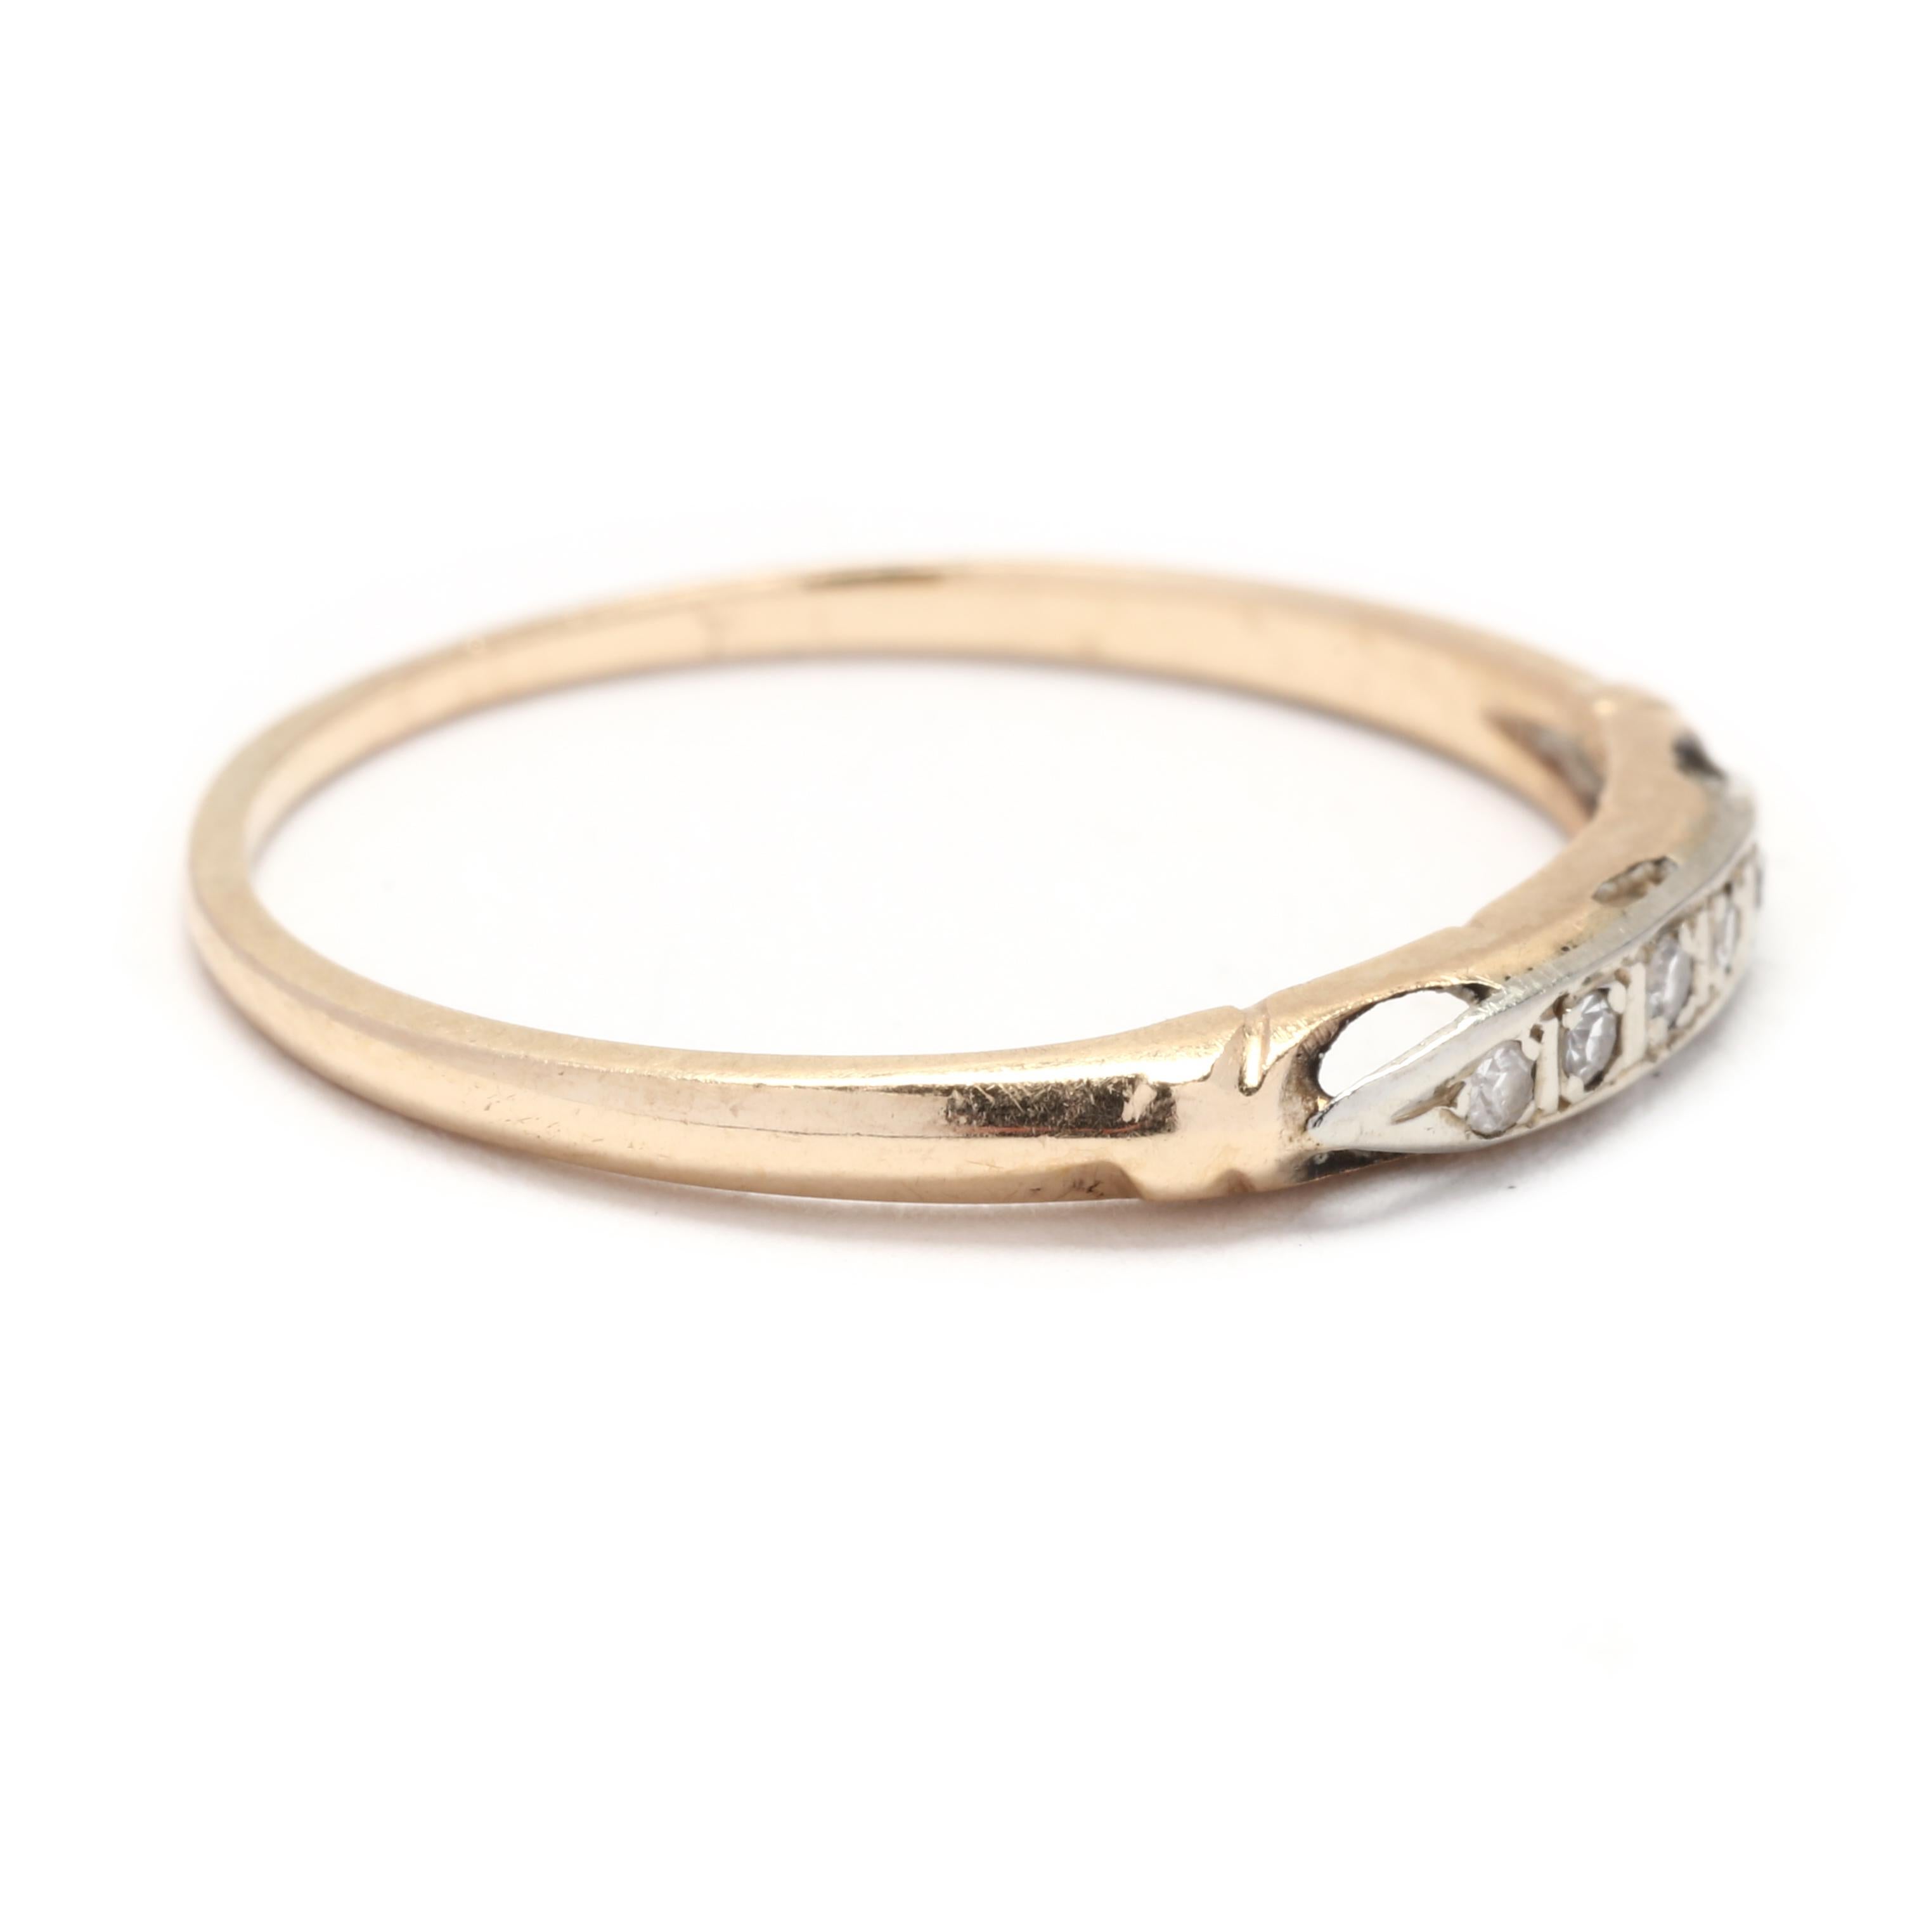 This 0.02ctw Retro Thin Diamond Wedding Band is a beautiful and delicate choice for your special day. Made with 14K yellow gold, this ring features a thin band with a total carat weight of 0.02. The diamonds are round cut and are set in a